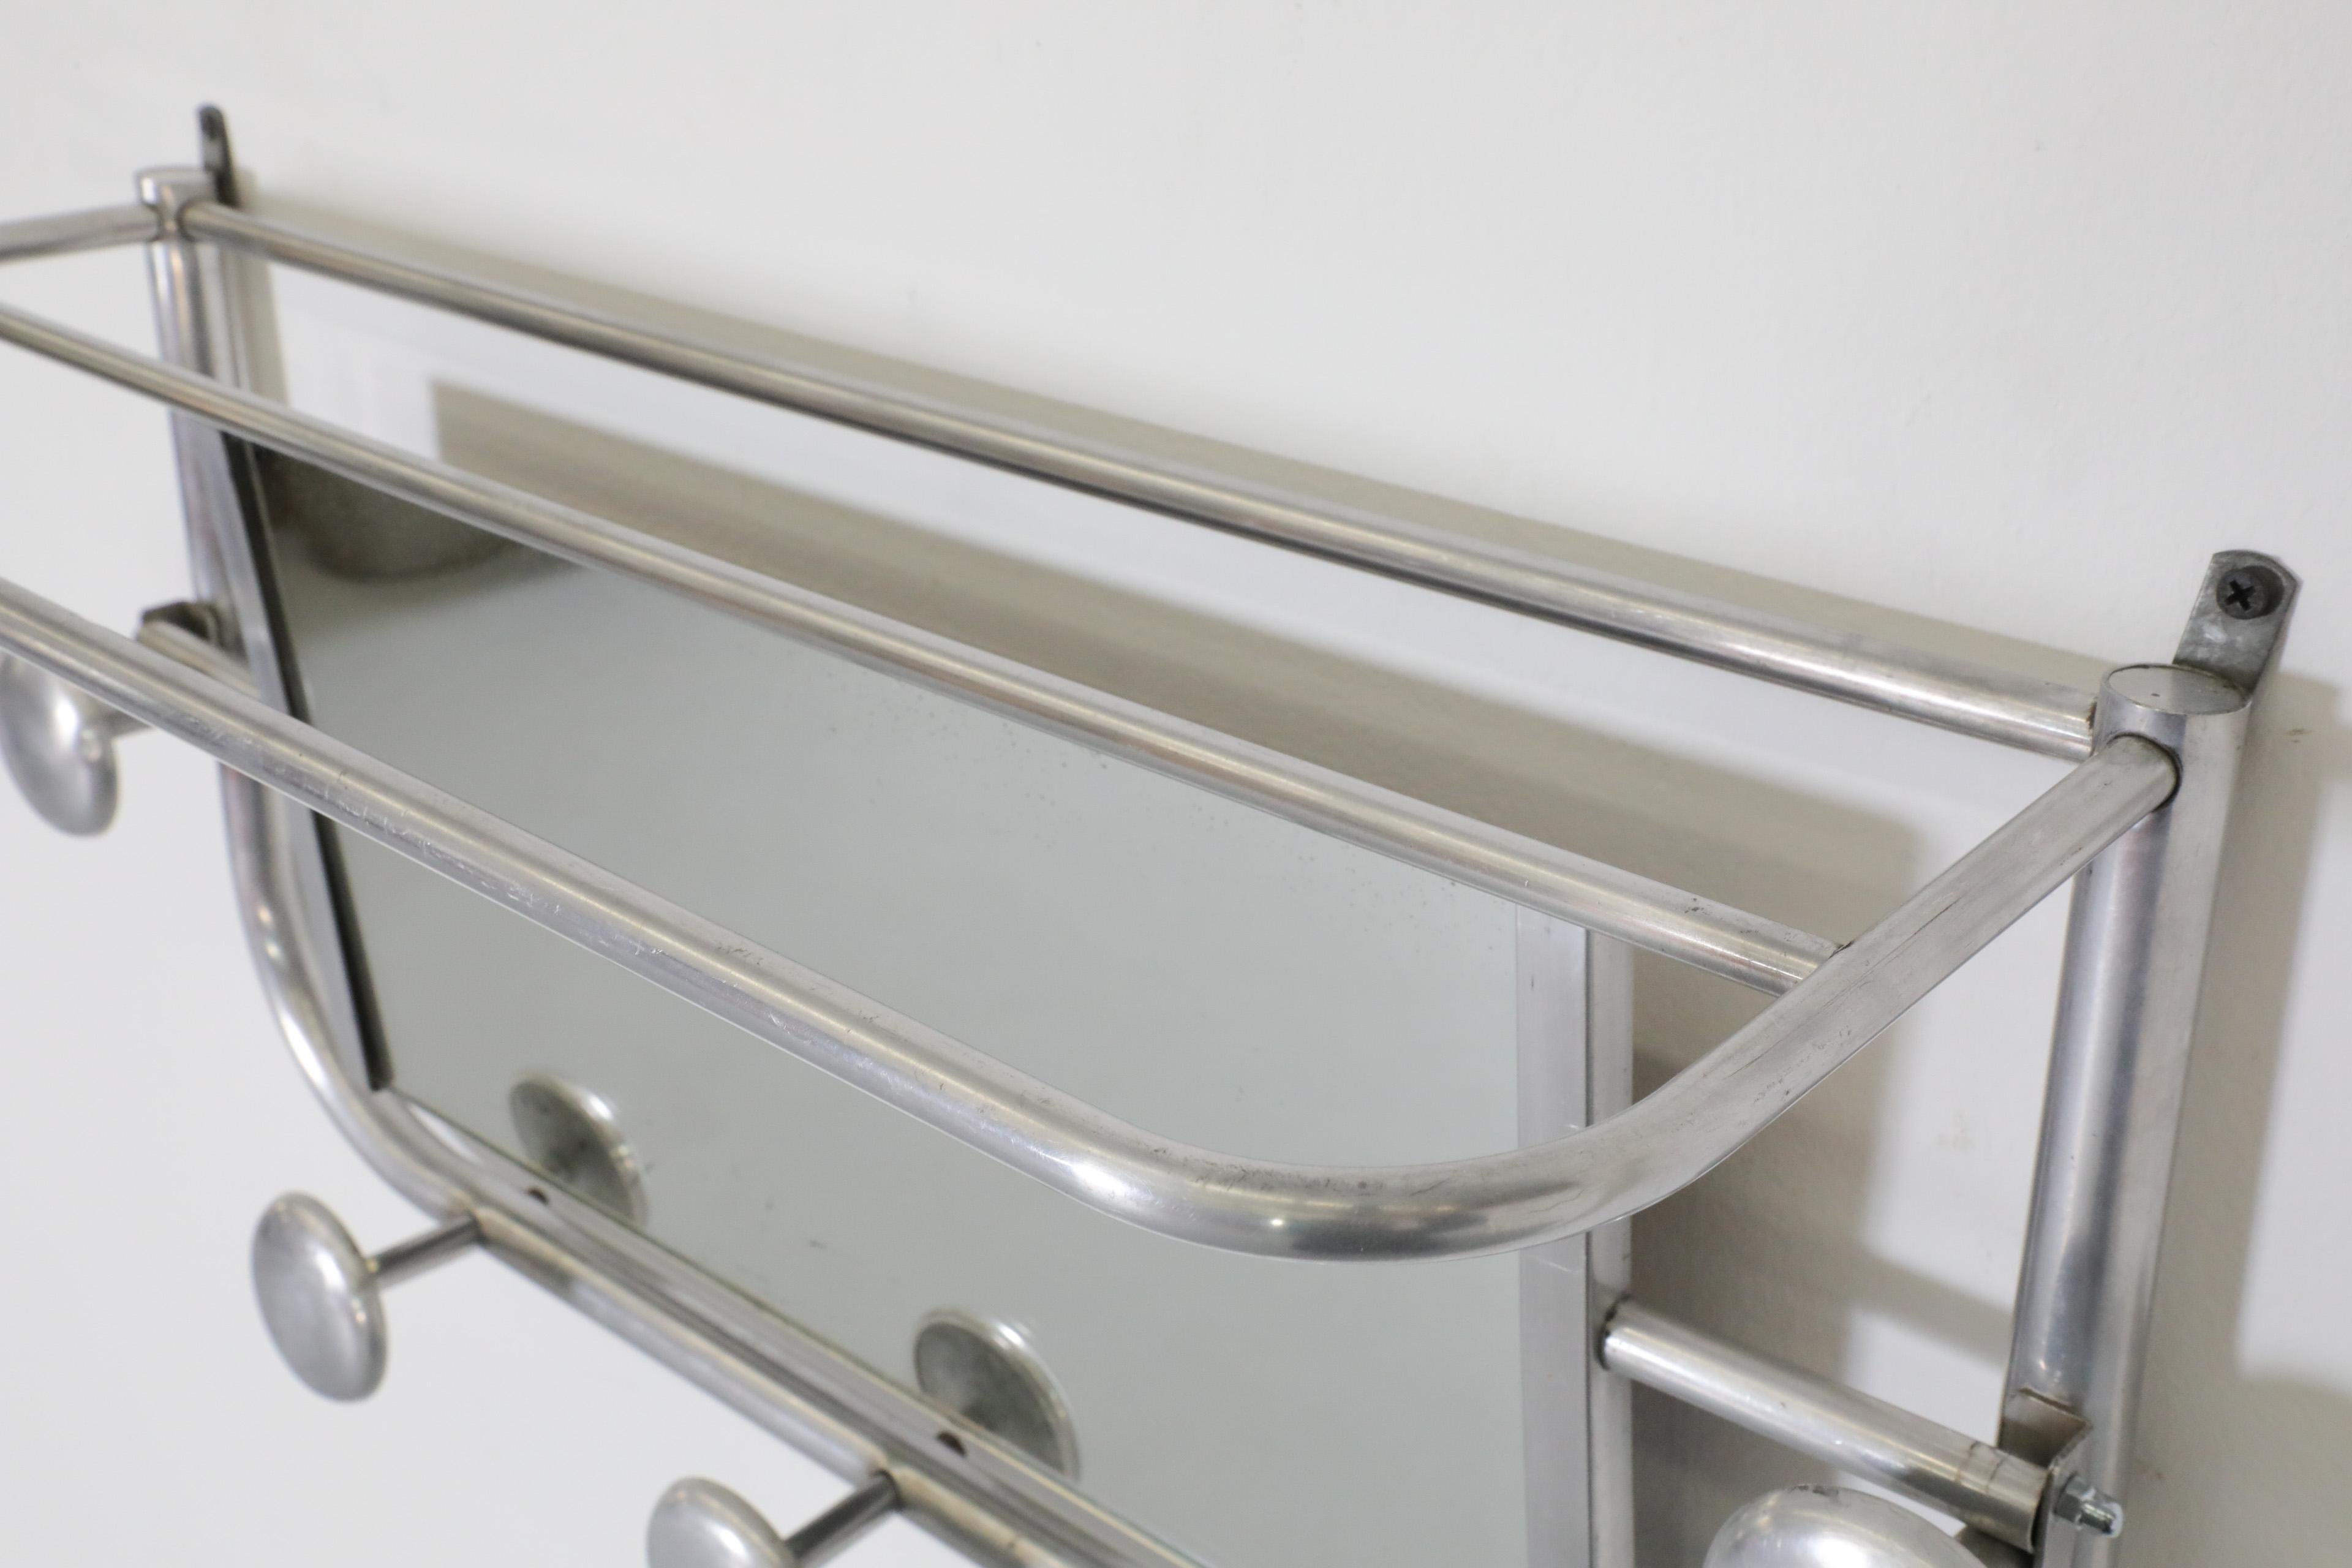 Mid-20th Century French Deco Mid-Century Aluminum Coat Rack attributed to Roger Feraud For Sale